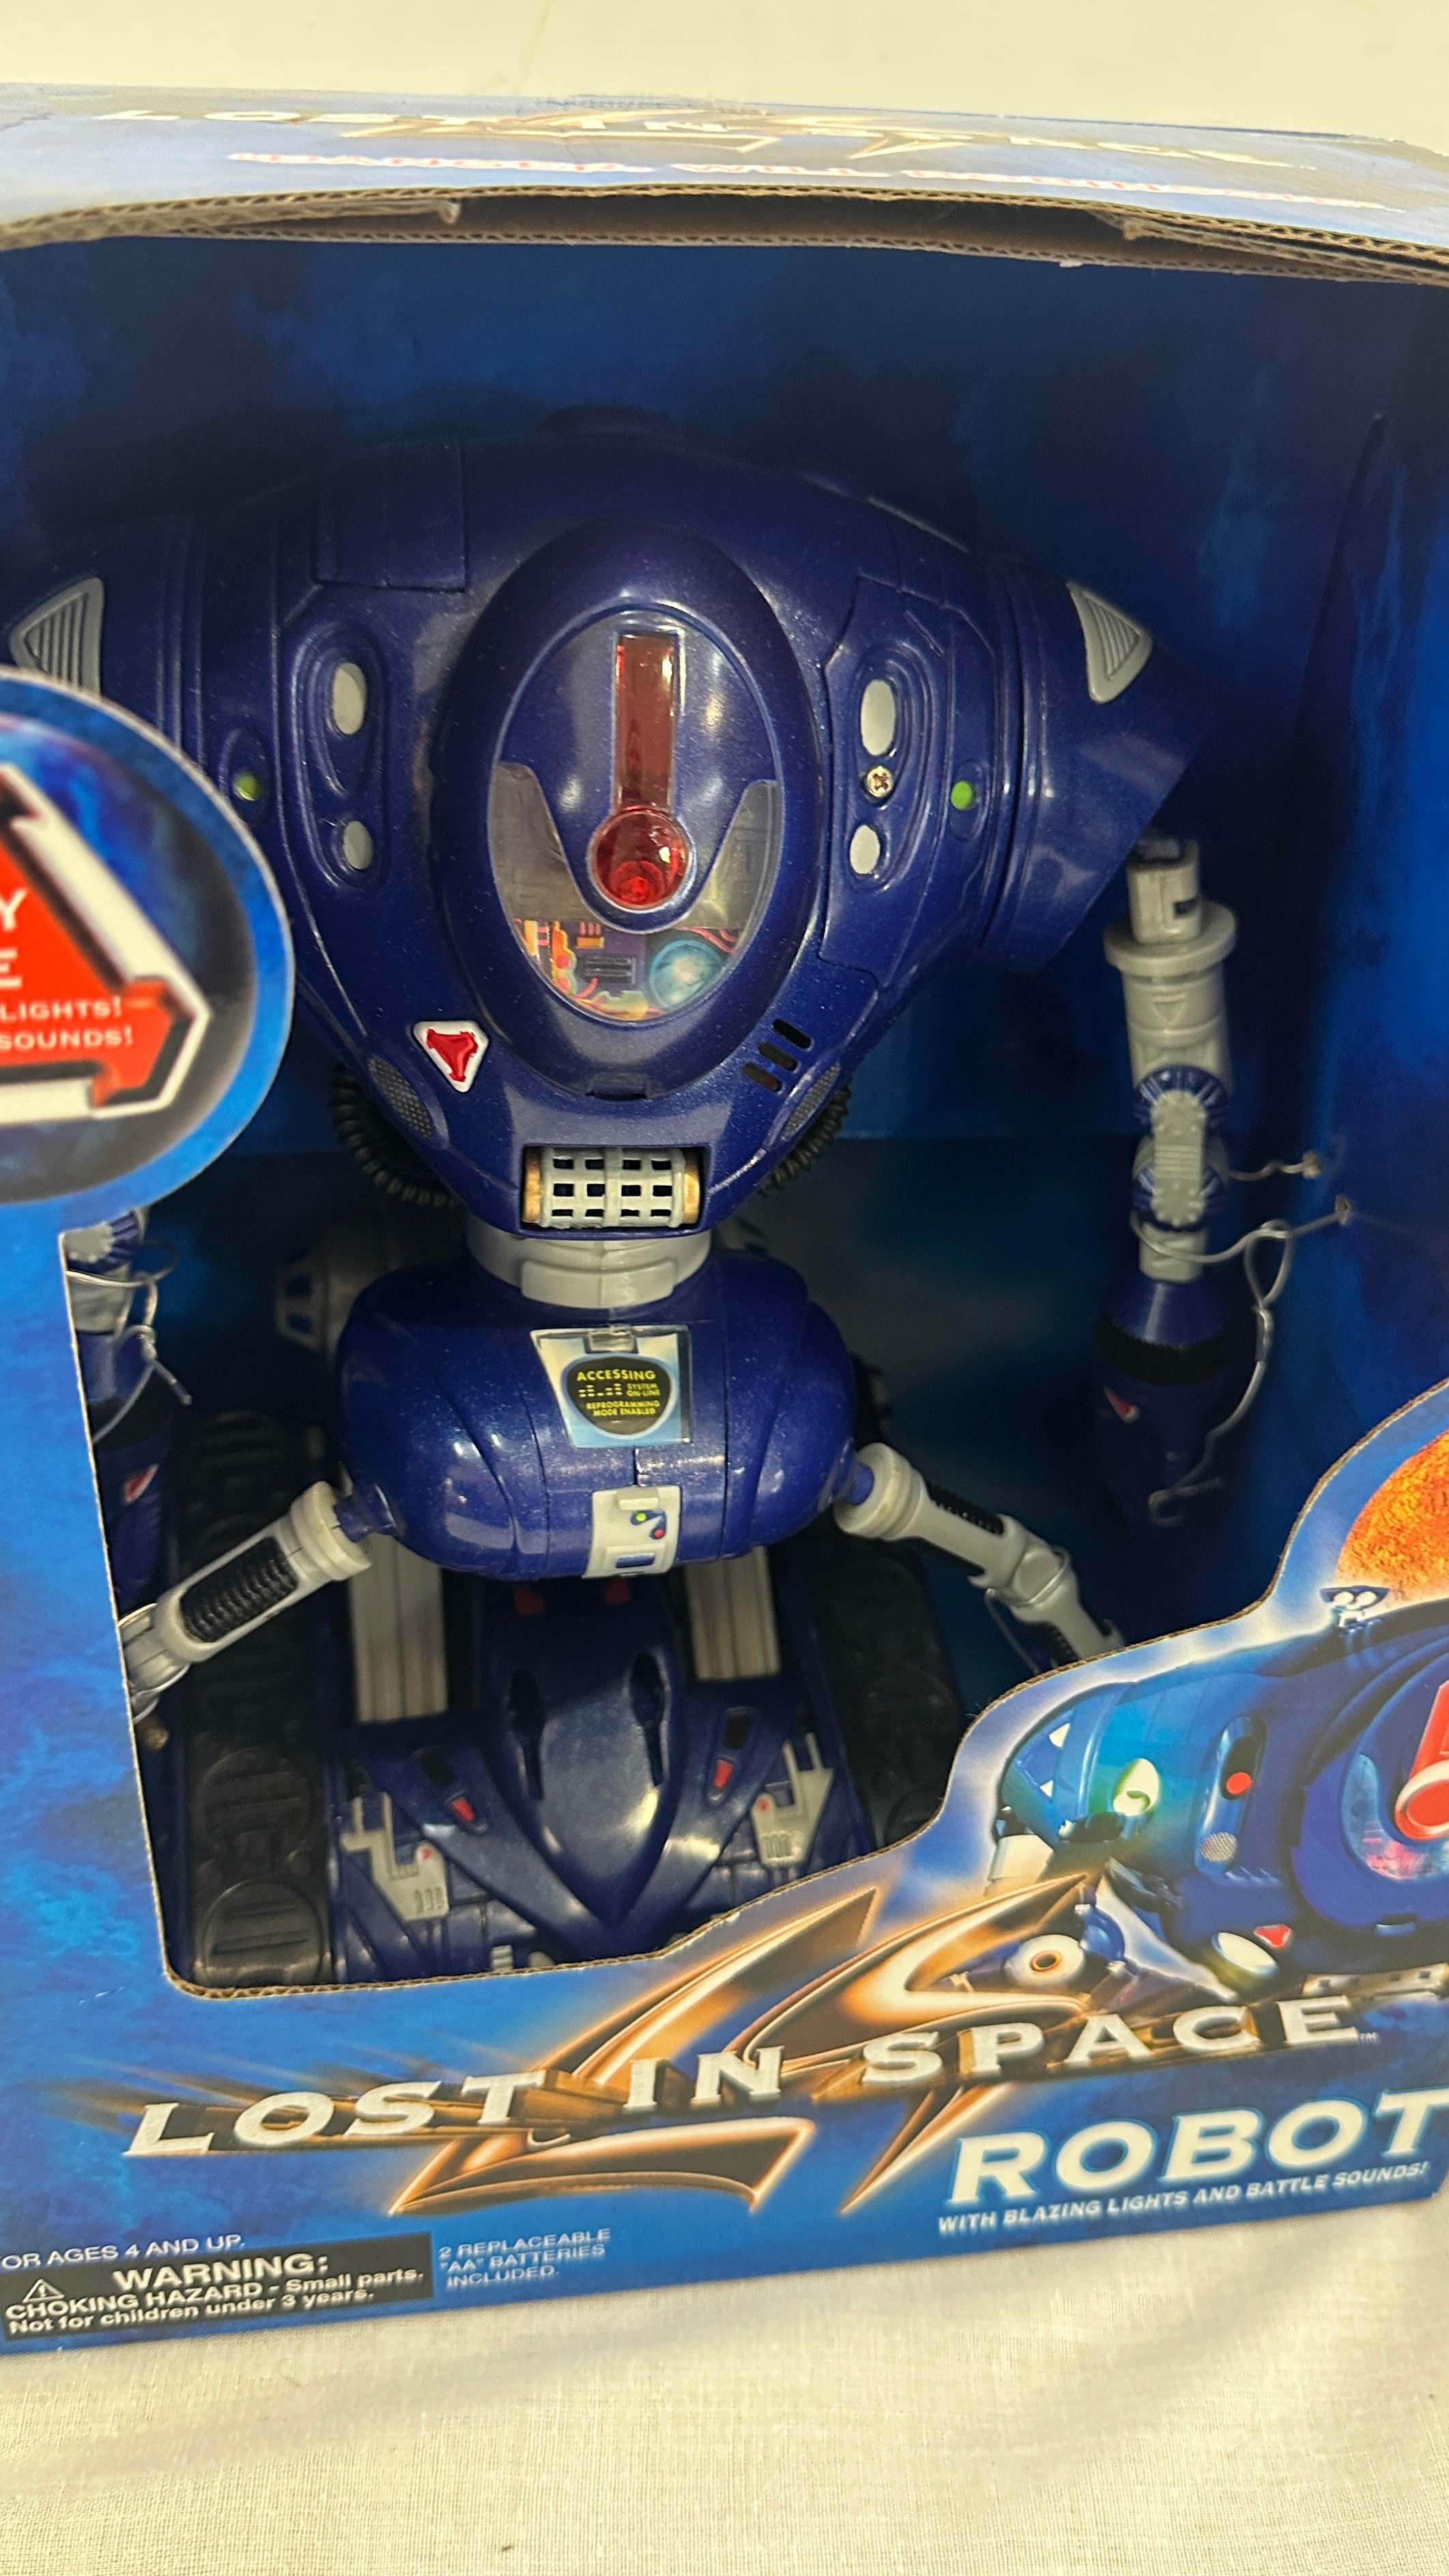 Original boxed Lost in Space Robot, - Image 3 of 3